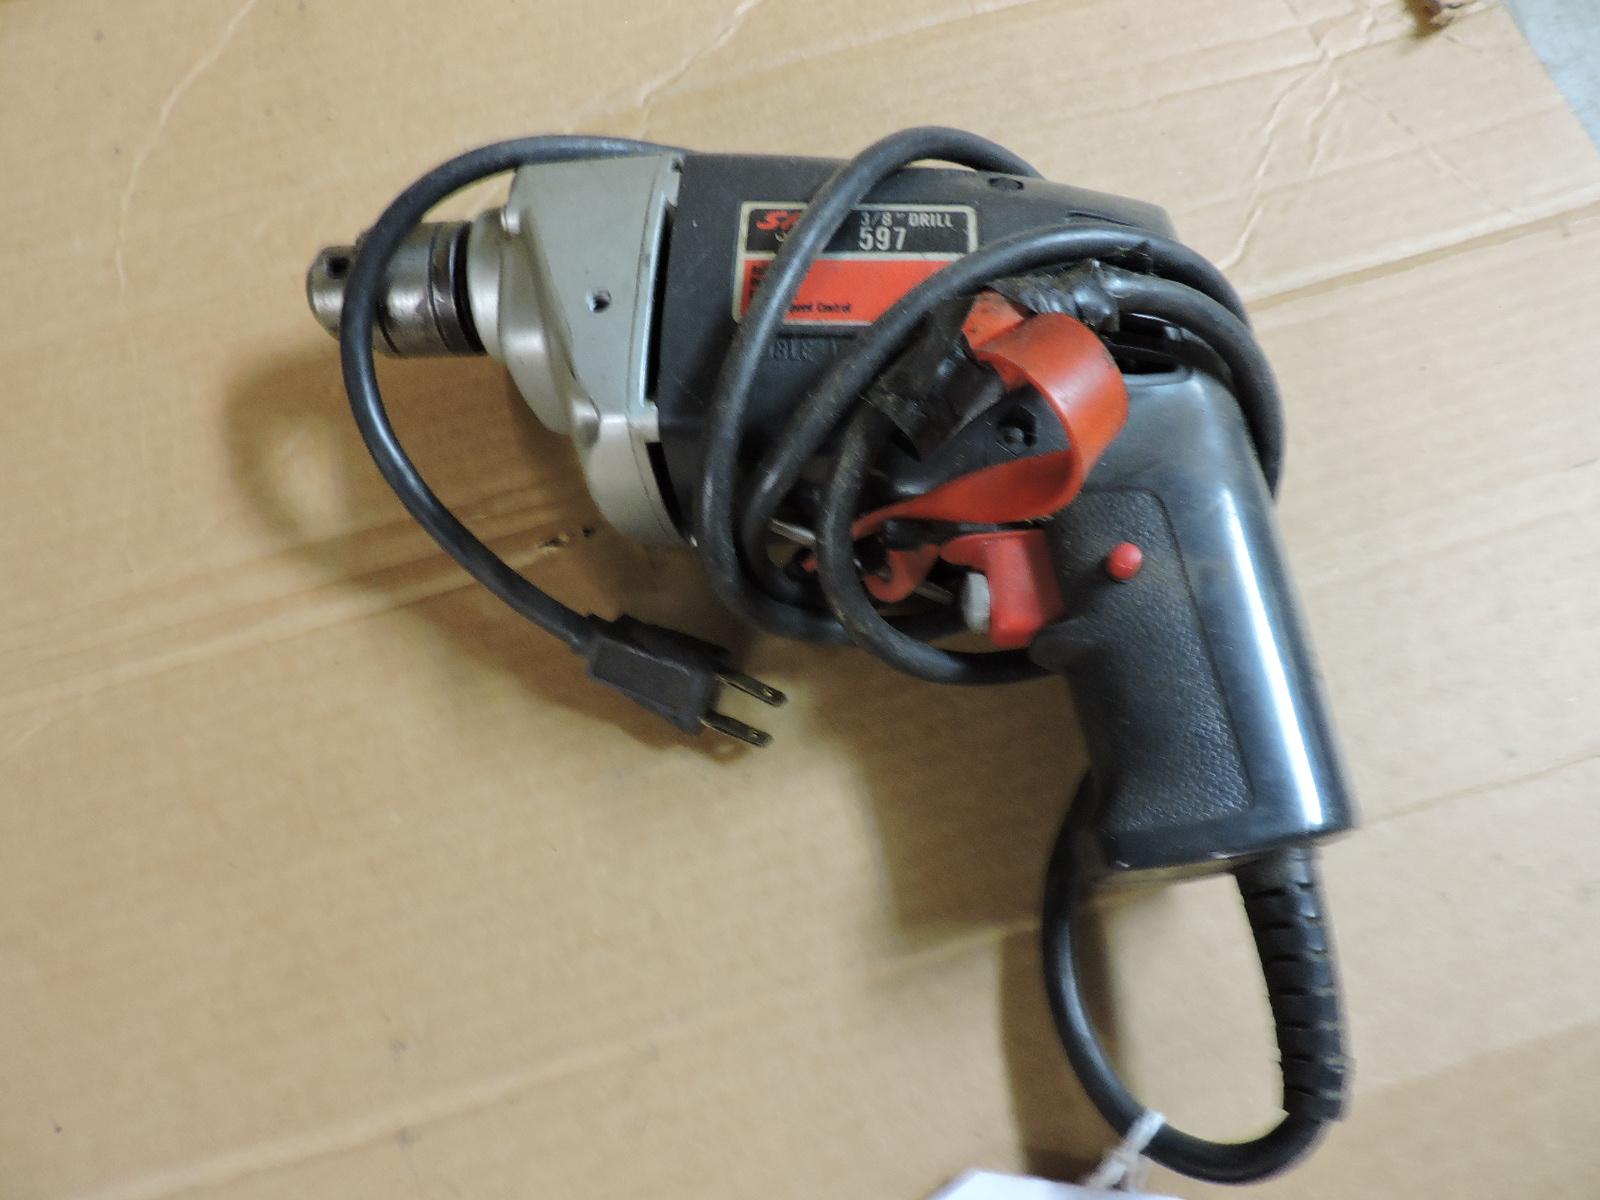 SKIL #597 3/8" Corded Drill with Chuck